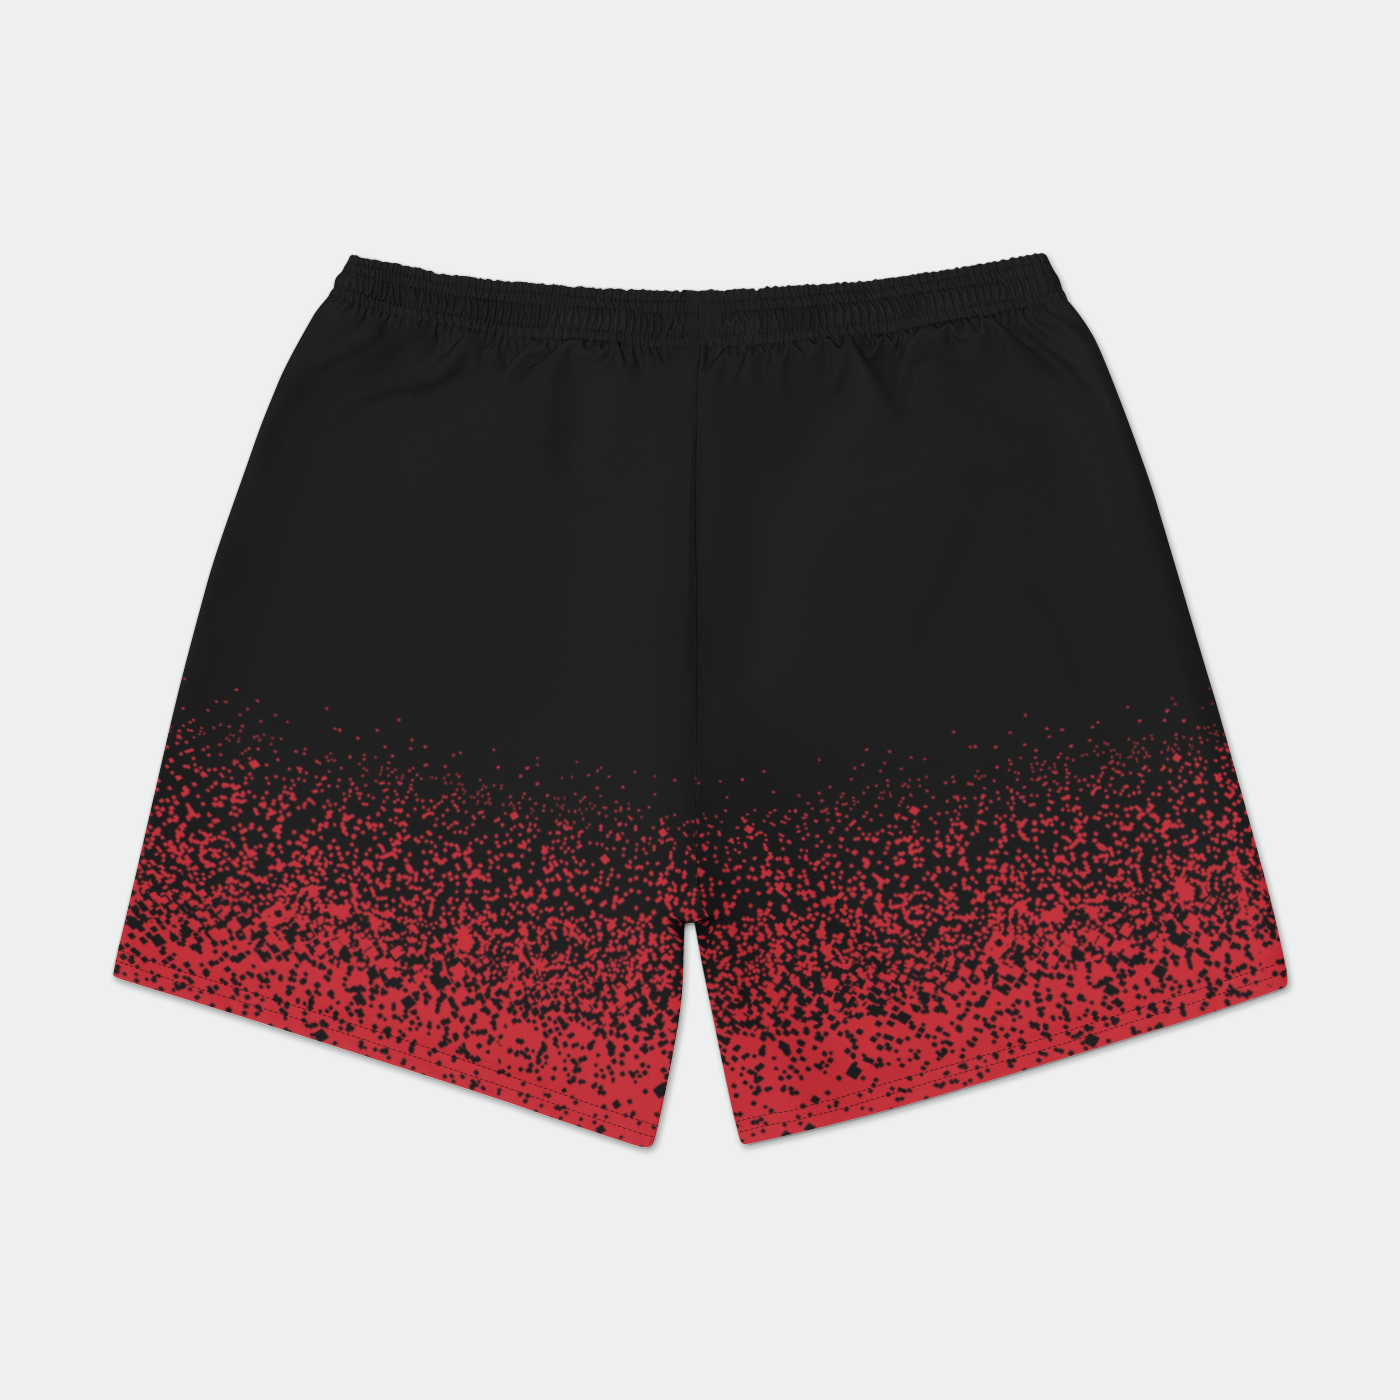 D'Youville Stardust Volleys